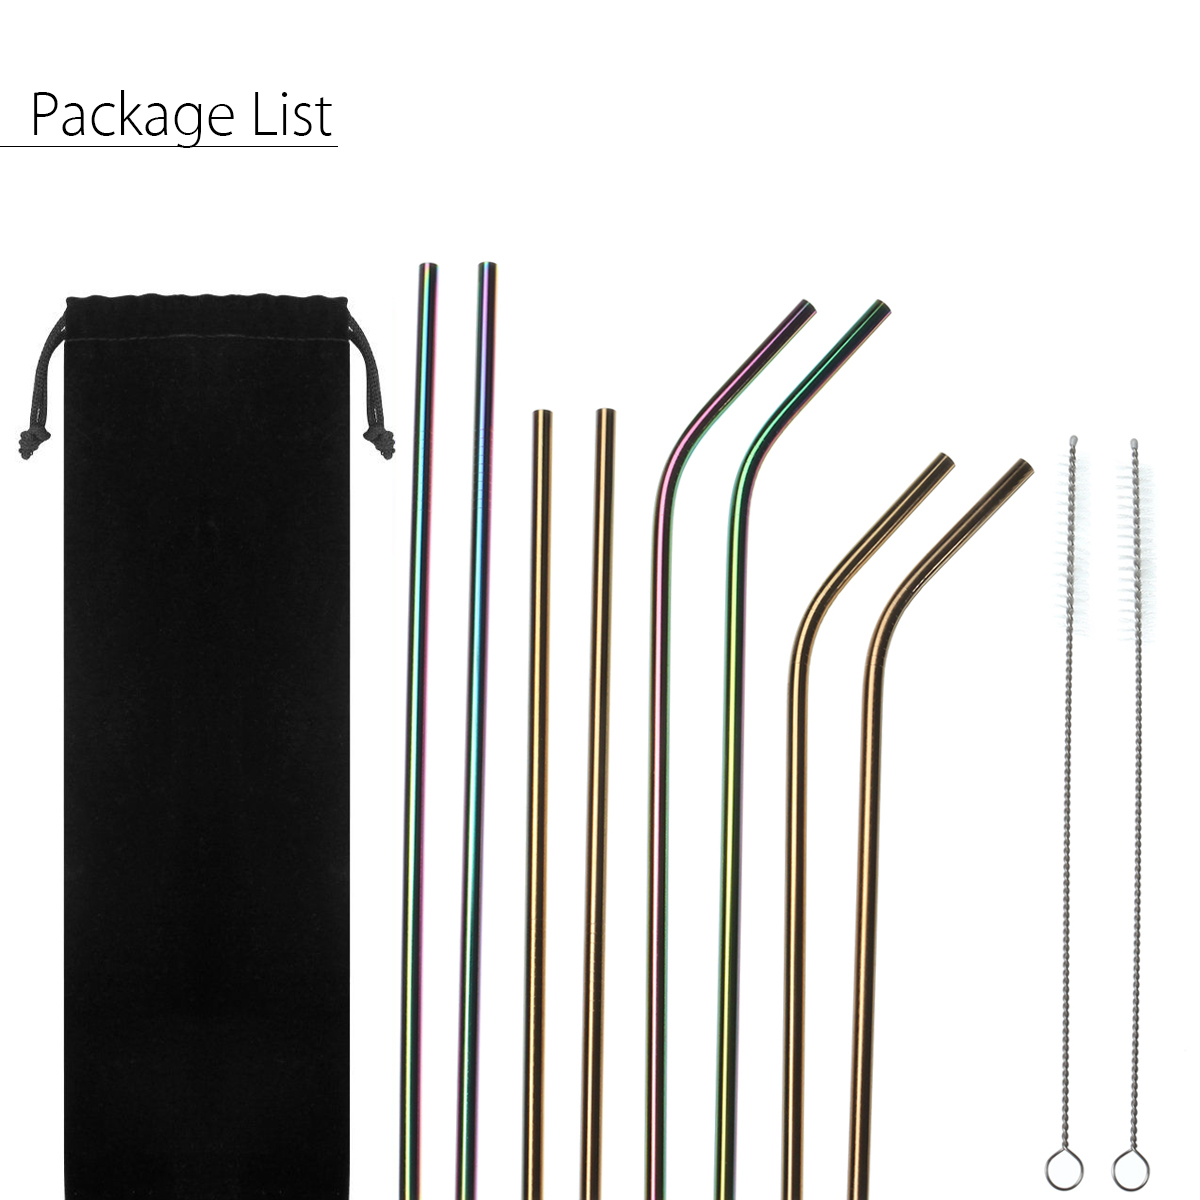 Stainless-Steel-Straw-Set-Long-Metal-Environment-Friendly-Drinking-Straws-Kit-With-2-Brushes-Bag-1311599-10